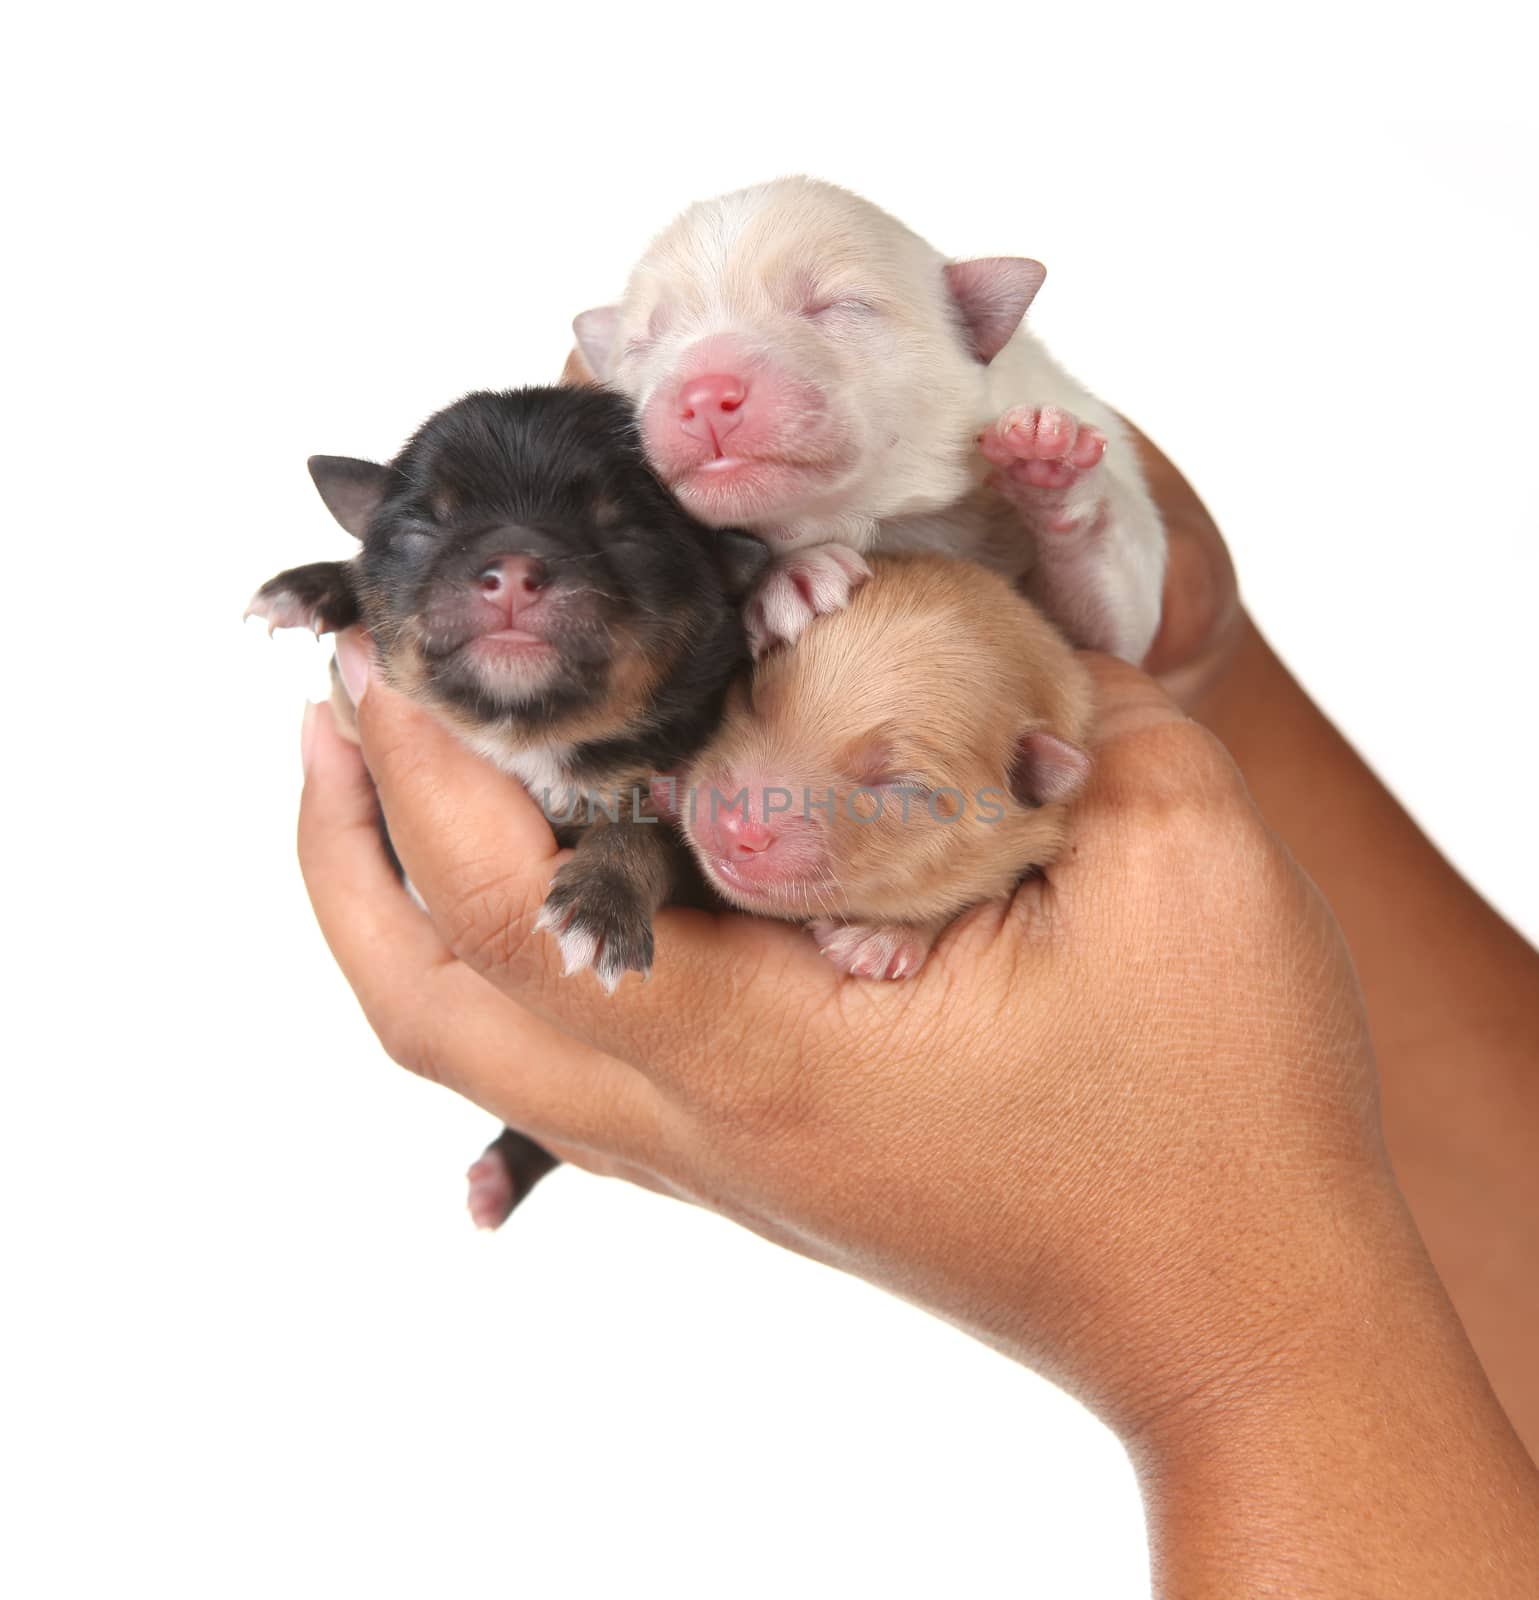 Three Cute Baby Puppies Being Held in Human Hands by tobkatrina